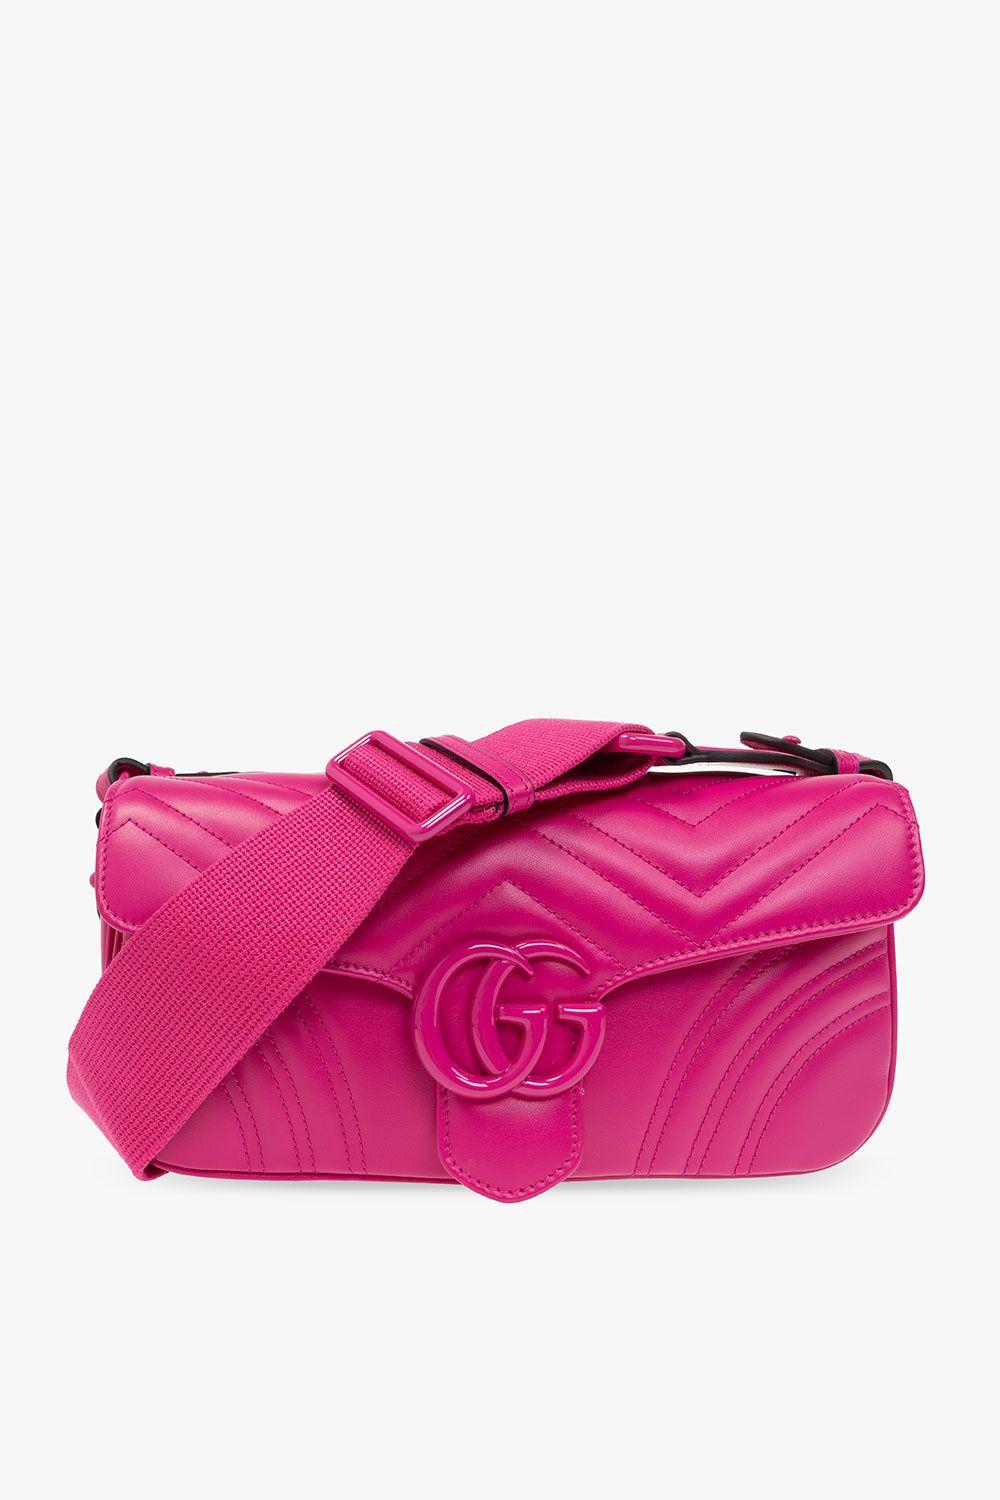 Gucci 'GG Marmont 2.0' Quilted Shoulder Bag in Pink | Lyst